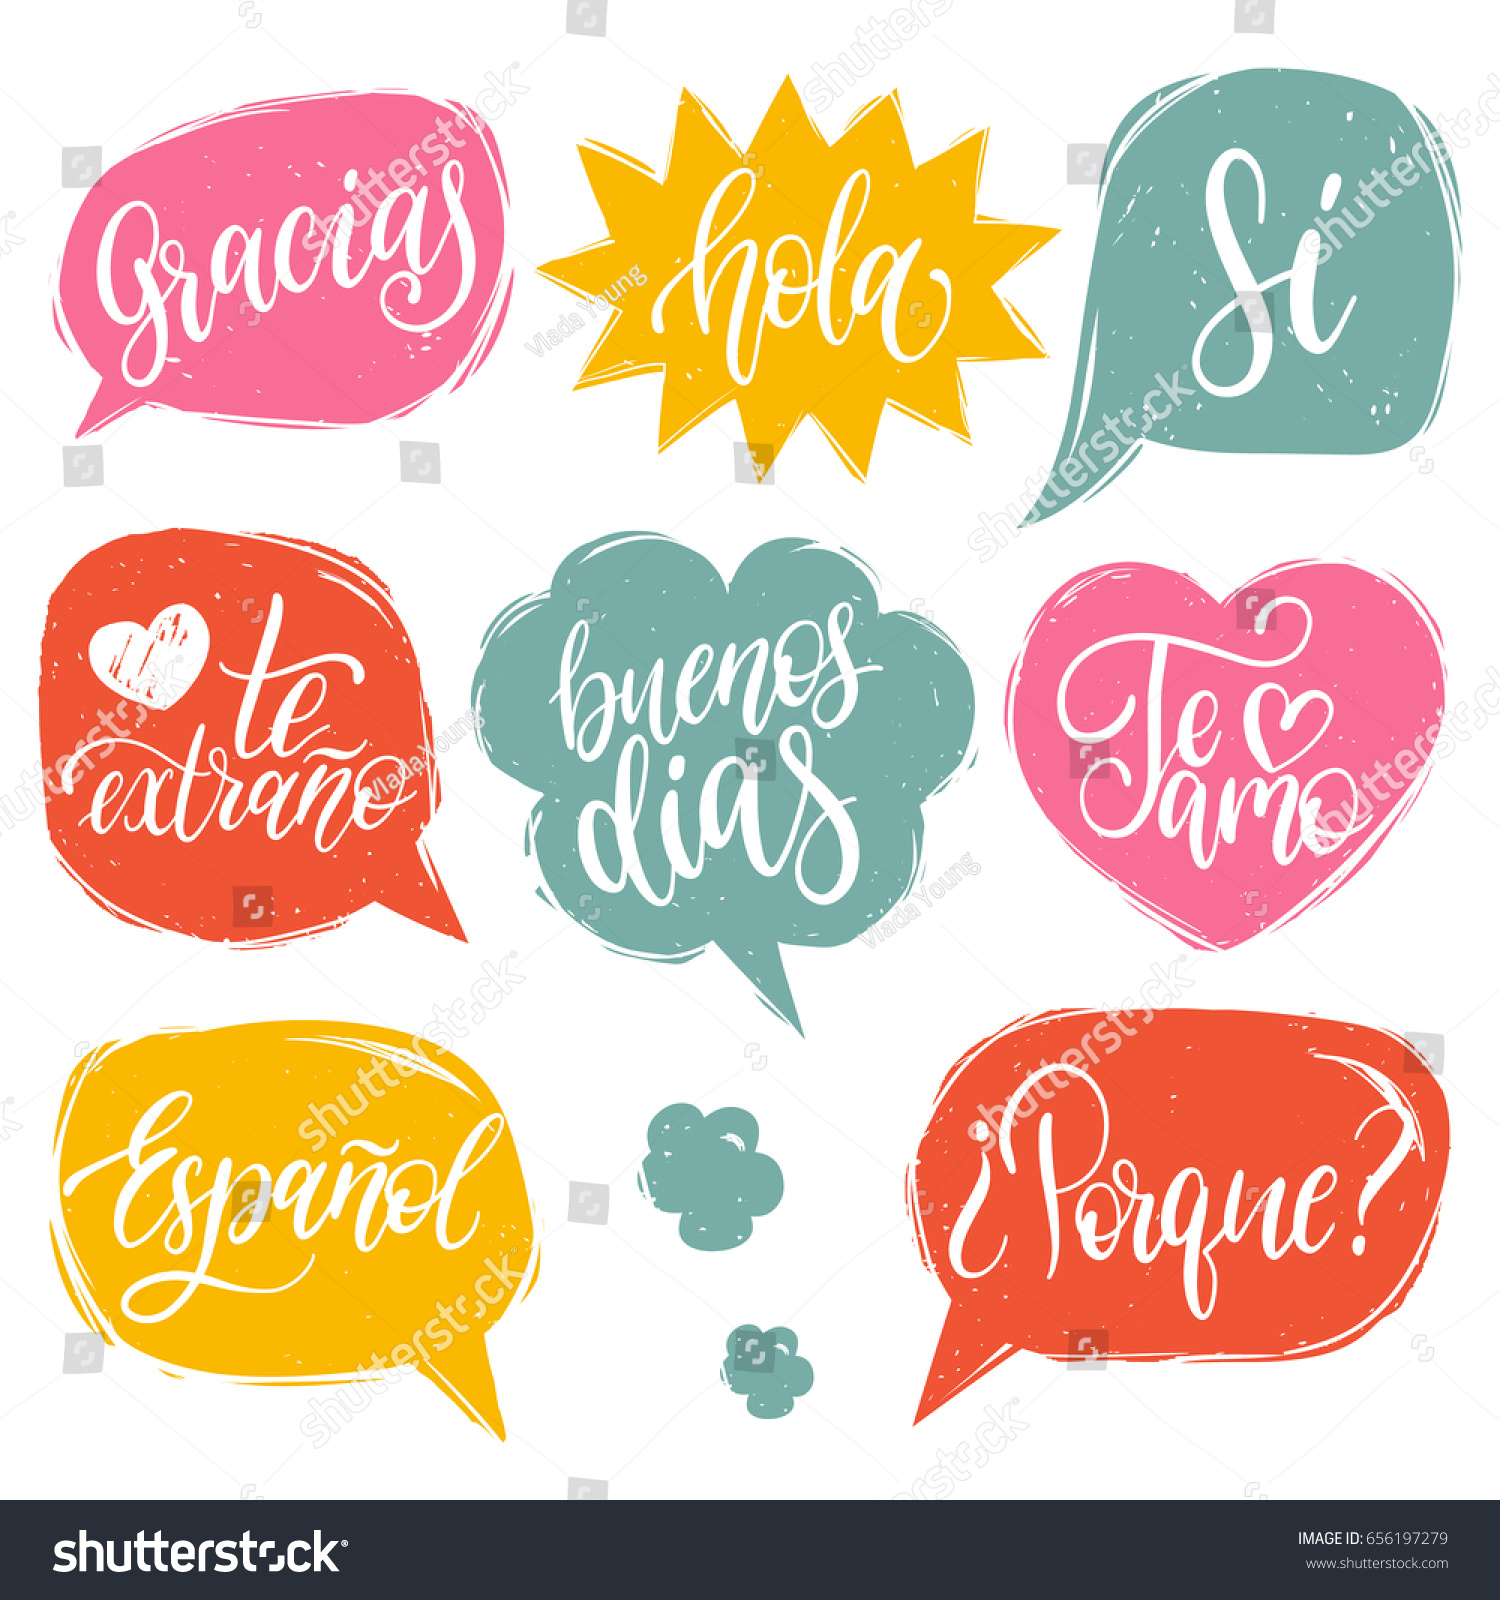 Vector calligraphic set of spanish translation of Thank You Good Day Why I